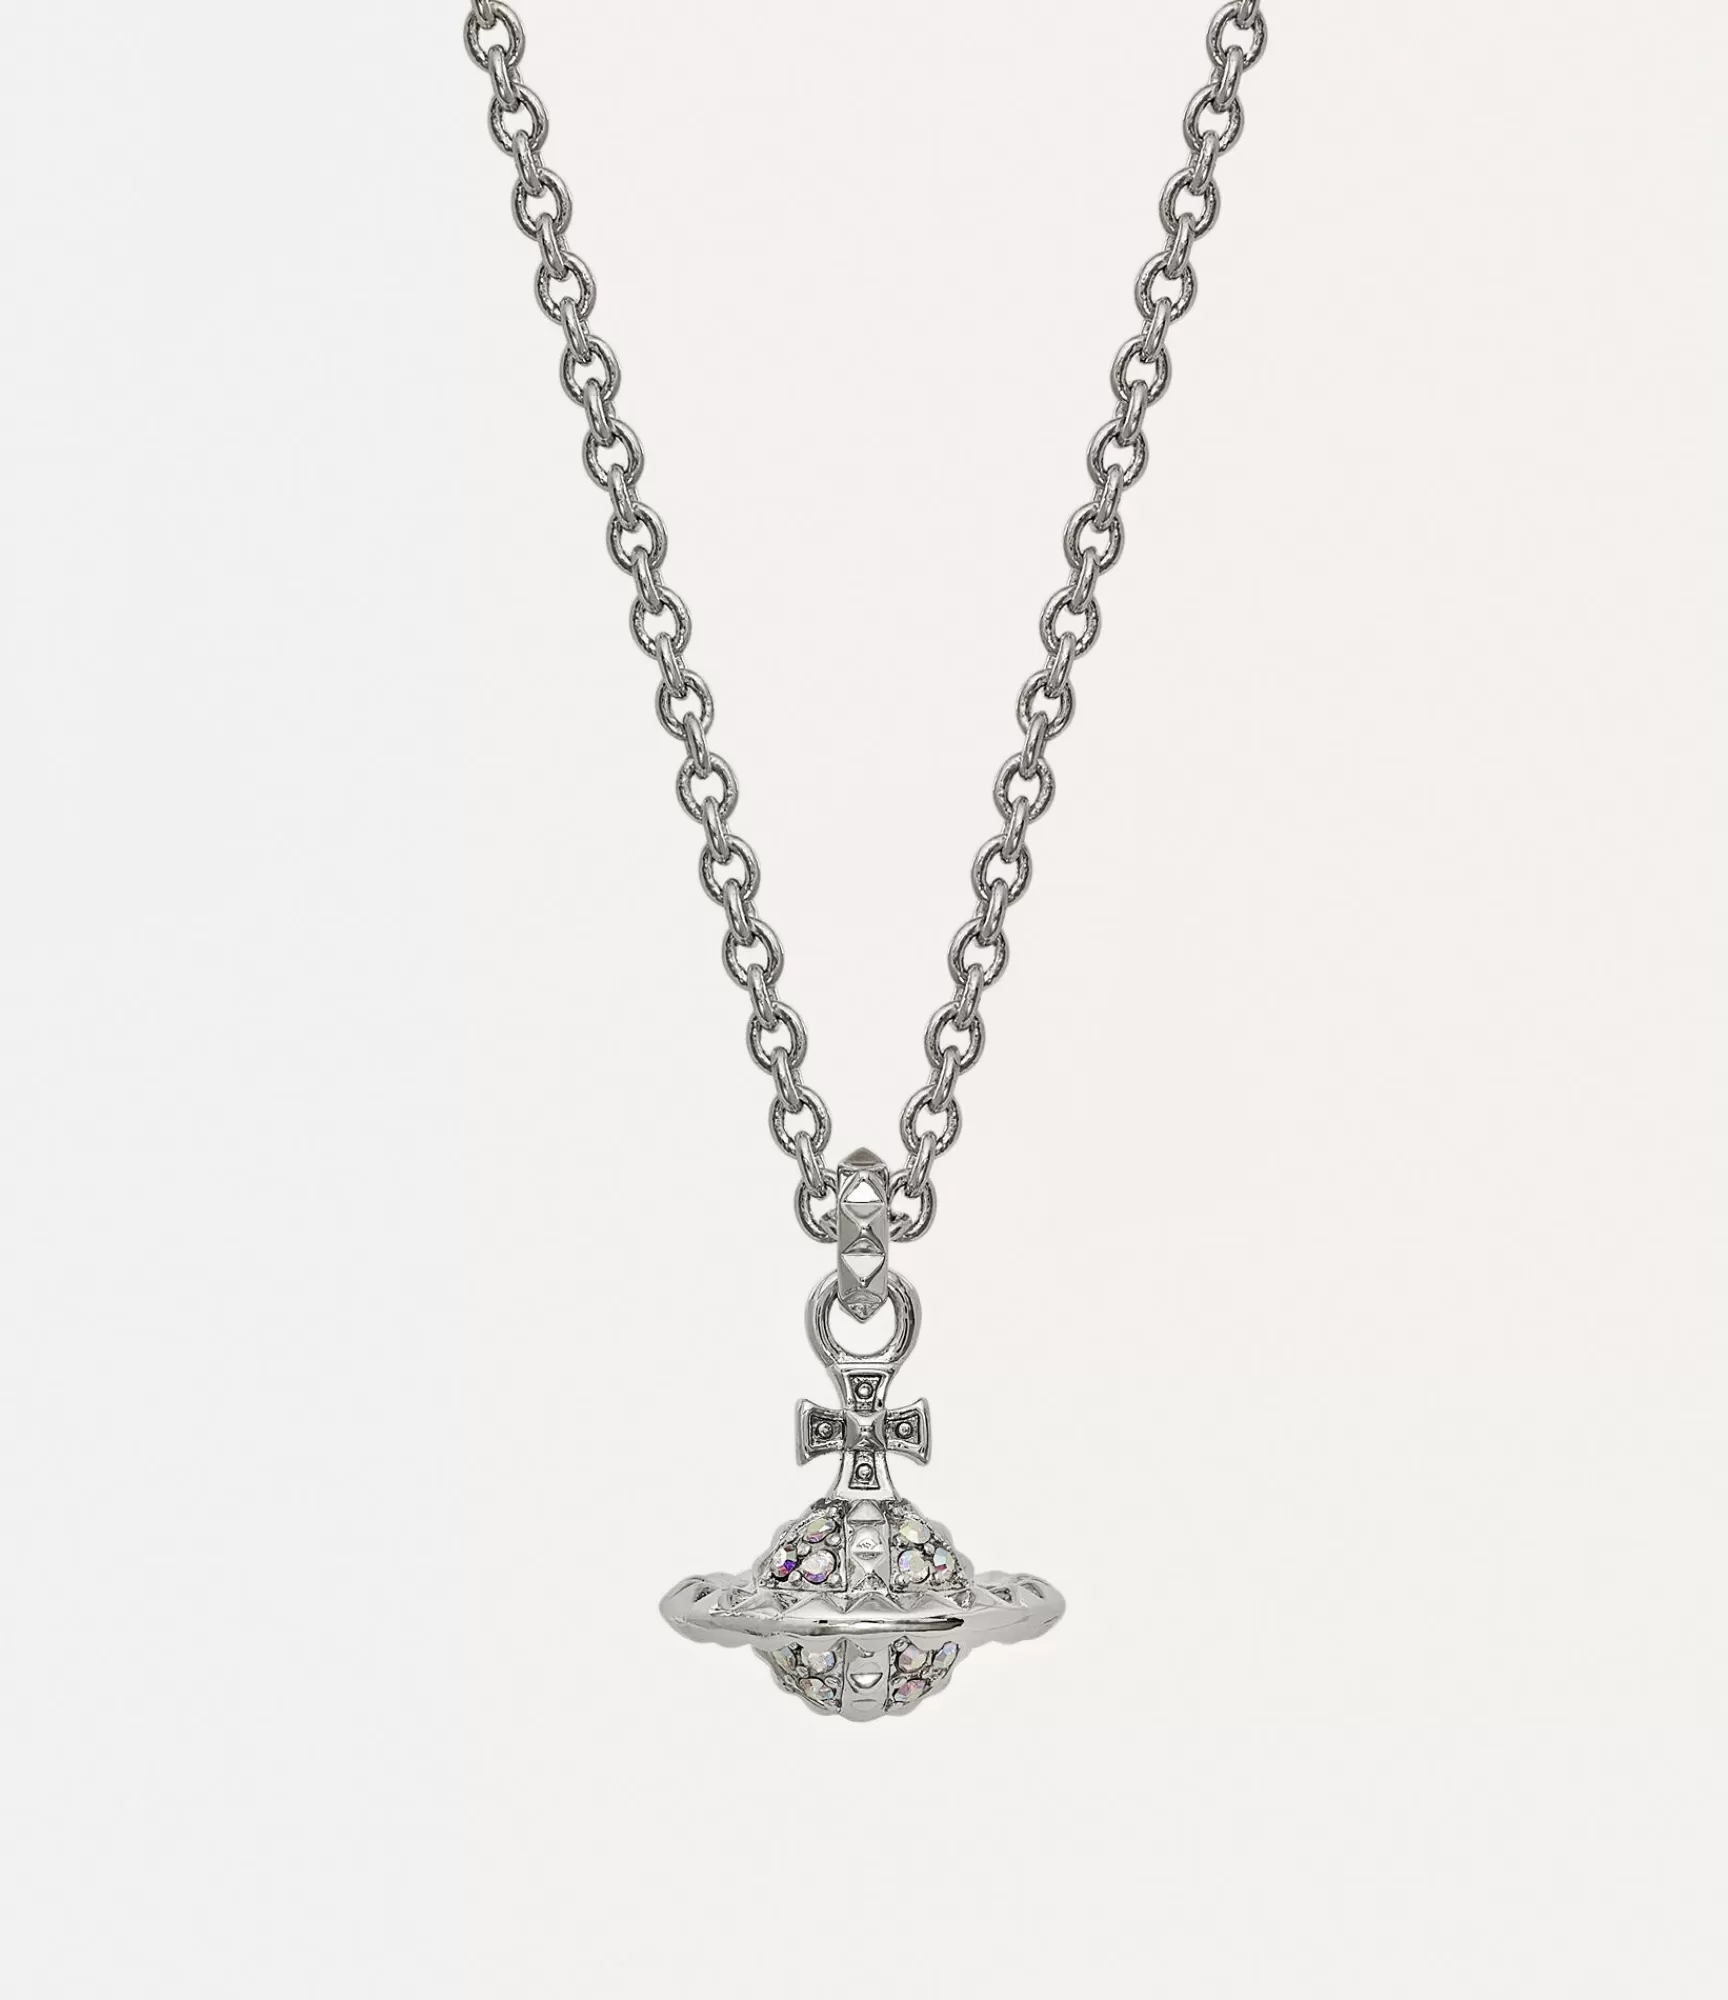 Vivienne Westwood Necklaces*Mayfair small orb pendant Rhodium Crystal